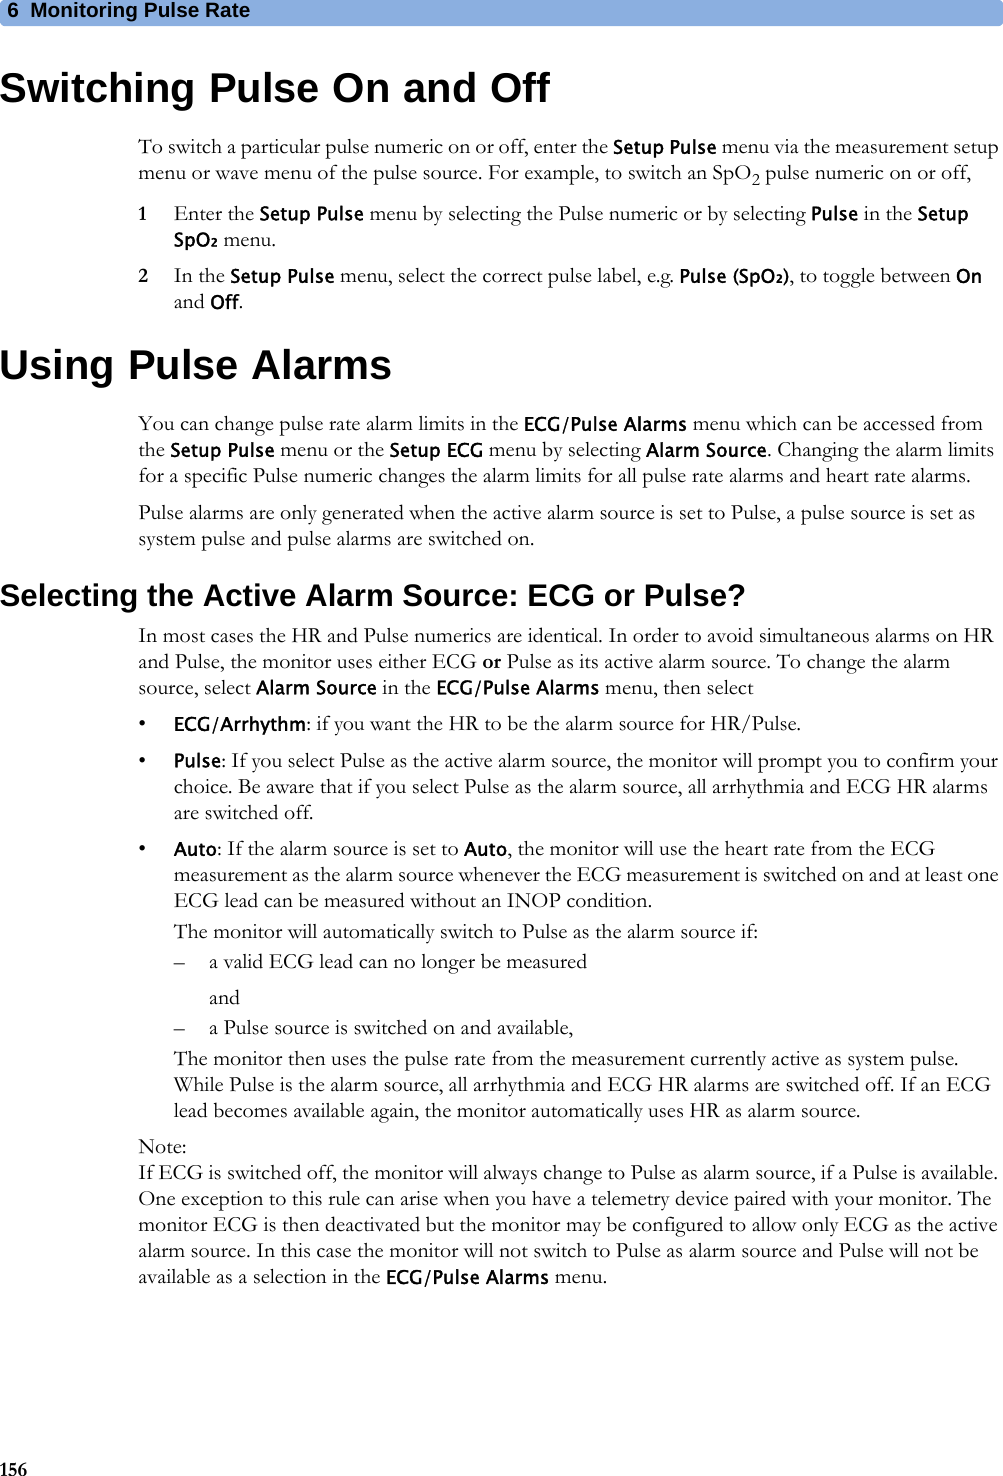 6 Monitoring Pulse Rate156Switching Pulse On and OffTo switch a particular pulse numeric on or off, enter the Setup Pulse menu via the measurement setup menu or wave menu of the pulse source. For example, to switch an SpO2 pulse numeric on or off,1Enter the Setup Pulse menu by selecting the Pulse numeric or by selecting Pulse in the Setup SpO₂ menu.2In the Setup Pulse menu, select the correct pulse label, e.g. Pulse (SpO₂), to toggle between On and Off.Using Pulse AlarmsYou can change pulse rate alarm limits in the ECG/Pulse Alarms menu which can be accessed from the Setup Pulse menu or the Setup ECG menu by selecting Alarm Source. Changing the alarm limits for a specific Pulse numeric changes the alarm limits for all pulse rate alarms and heart rate alarms.Pulse alarms are only generated when the active alarm source is set to Pulse, a pulse source is set as system pulse and pulse alarms are switched on.Selecting the Active Alarm Source: ECG or Pulse?In most cases the HR and Pulse numerics are identical. In order to avoid simultaneous alarms on HR and Pulse, the monitor uses either ECG or Pulse as its active alarm source. To change the alarm source, select Alarm Source in the ECG/Pulse Alarms menu, then select•ECG/Arrhythm: if you want the HR to be the alarm source for HR/Pulse.•Pulse: If you select Pulse as the active alarm source, the monitor will prompt you to confirm your choice. Be aware that if you select Pulse as the alarm source, all arrhythmia and ECG HR alarms are switched off.•Auto: If the alarm source is set to Auto, the monitor will use the heart rate from the ECG measurement as the alarm source whenever the ECG measurement is switched on and at least one ECG lead can be measured without an INOP condition.The monitor will automatically switch to Pulse as the alarm source if:– a valid ECG lead can no longer be measuredand– a Pulse source is switched on and available,The monitor then uses the pulse rate from the measurement currently active as system pulse. While Pulse is the alarm source, all arrhythmia and ECG HR alarms are switched off. If an ECG lead becomes available again, the monitor automatically uses HR as alarm source.Note:If ECG is switched off, the monitor will always change to Pulse as alarm source, if a Pulse is available. One exception to this rule can arise when you have a telemetry device paired with your monitor. The monitor ECG is then deactivated but the monitor may be configured to allow only ECG as the active alarm source. In this case the monitor will not switch to Pulse as alarm source and Pulse will not be available as a selection in the ECG/Pulse Alarms menu.